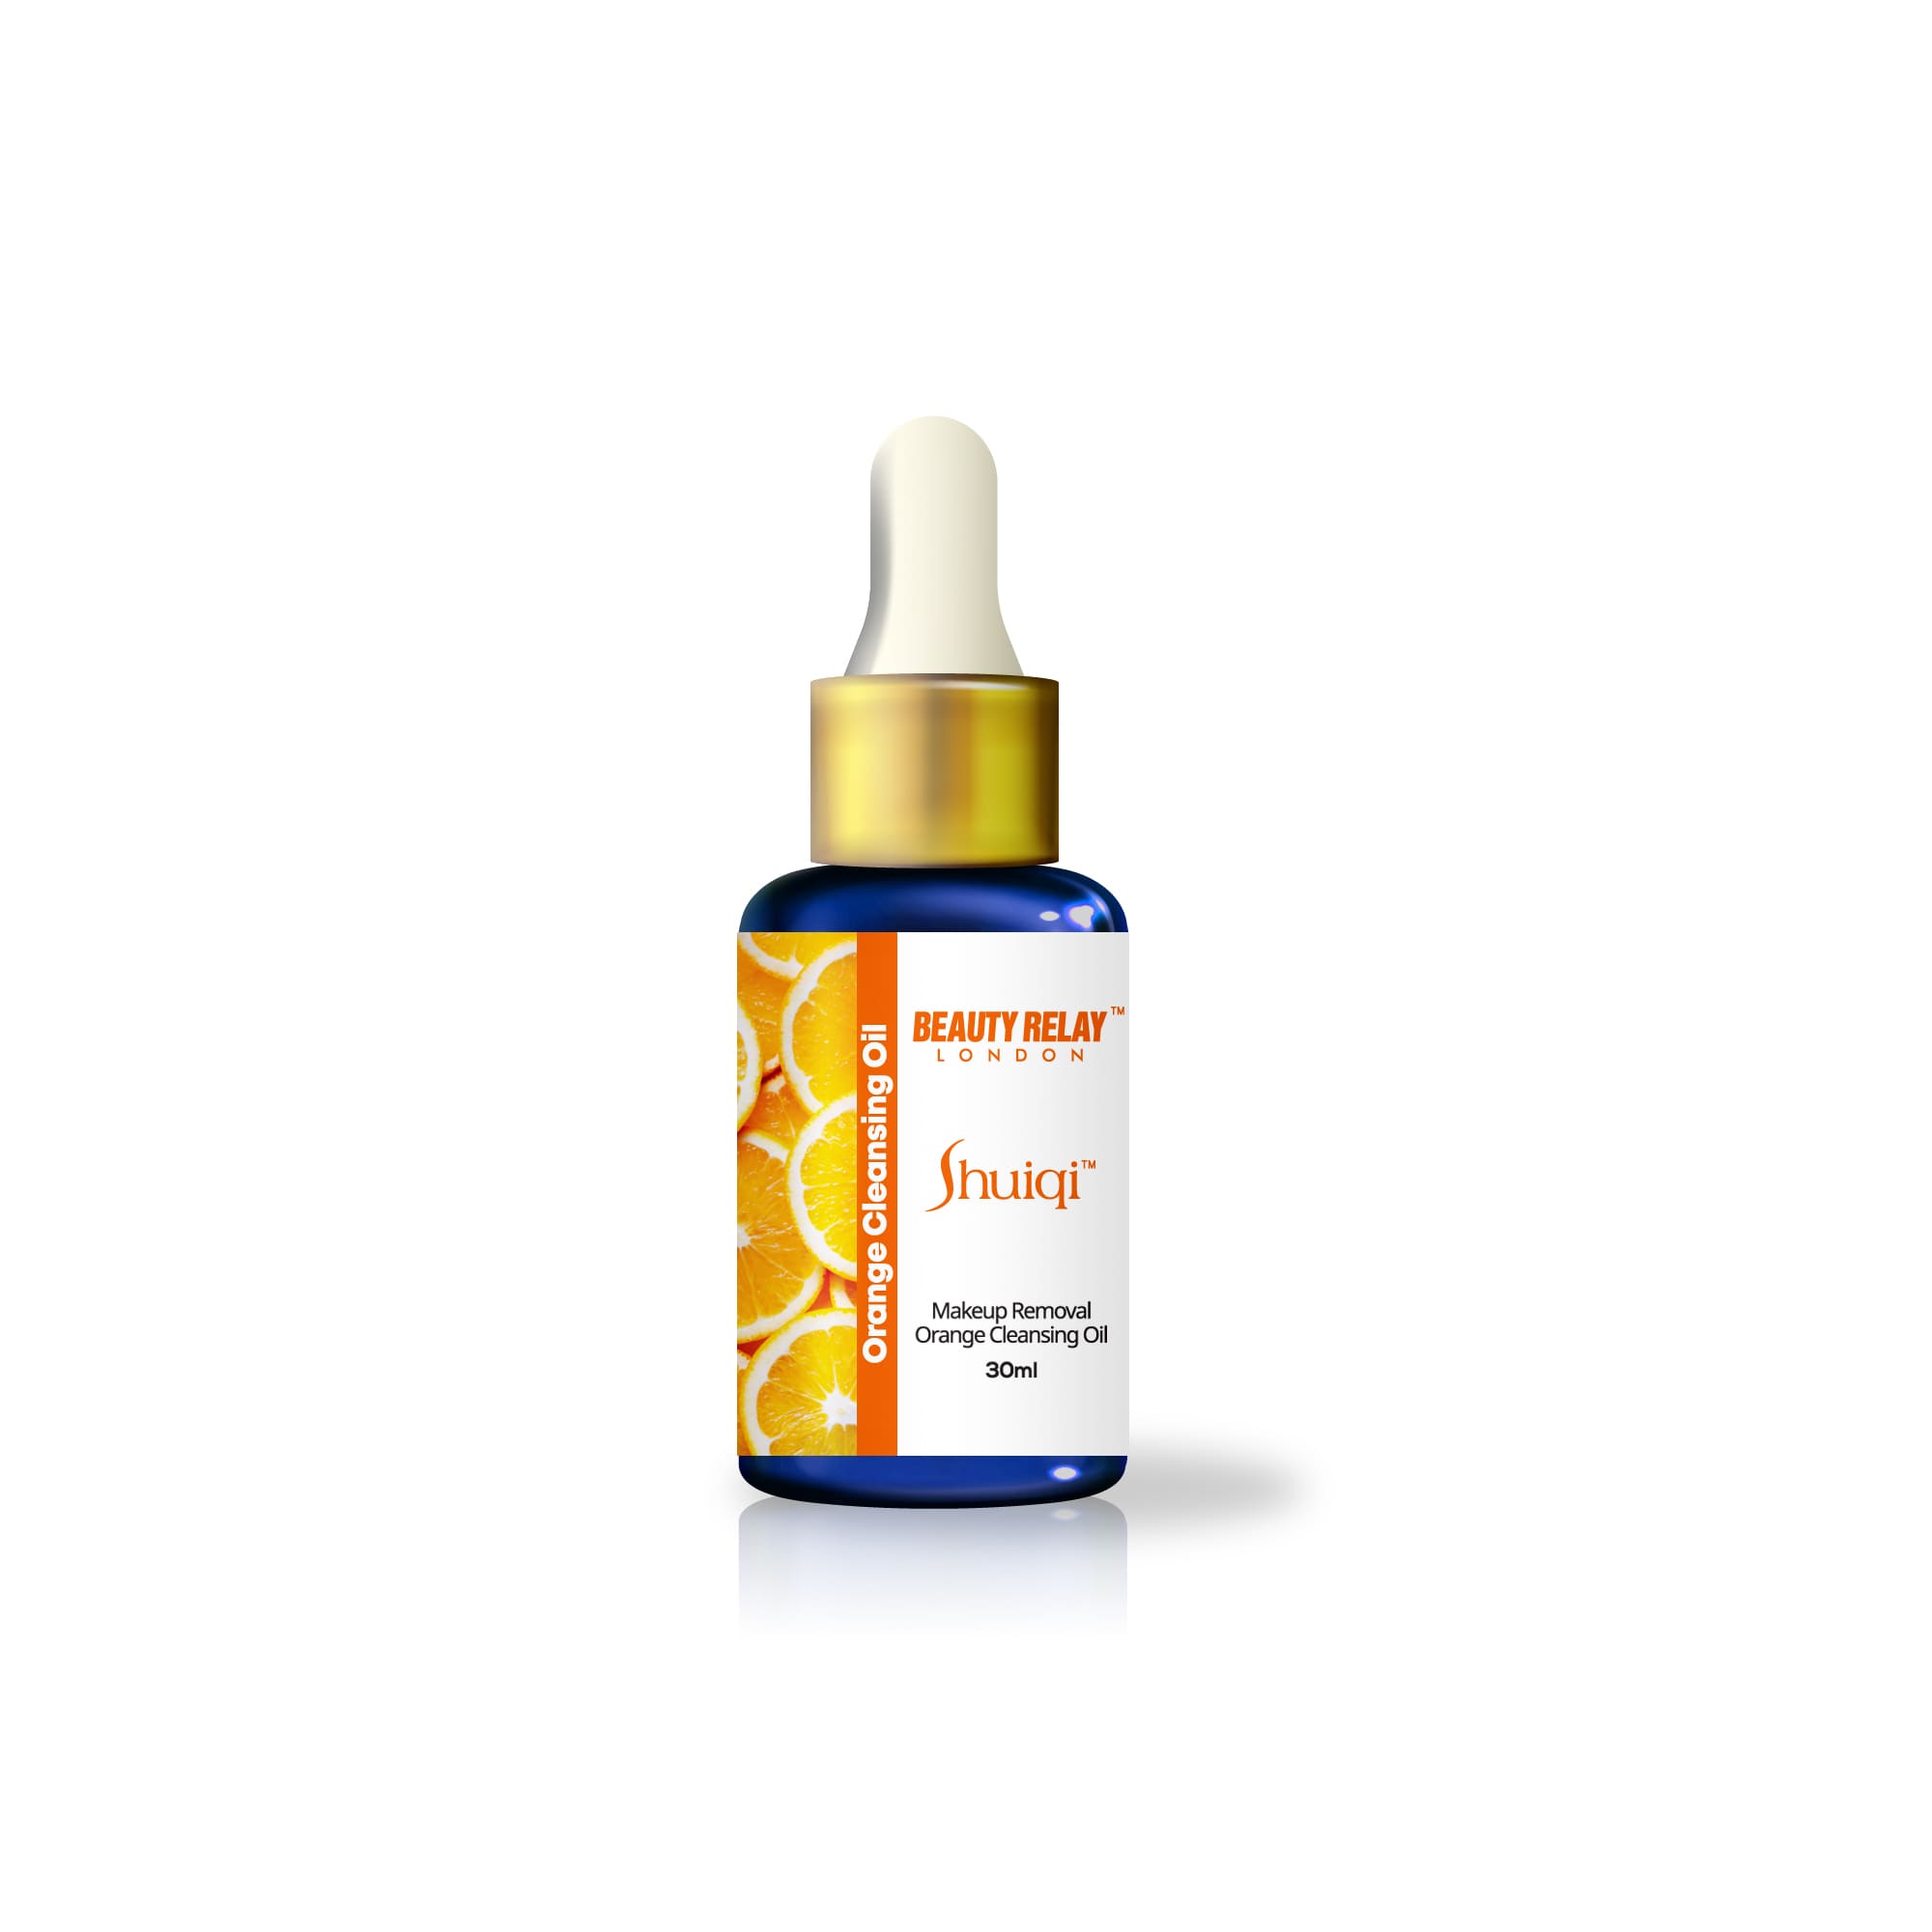 Makeup Removal Oil With Sunflower Oil And Vitamin-E